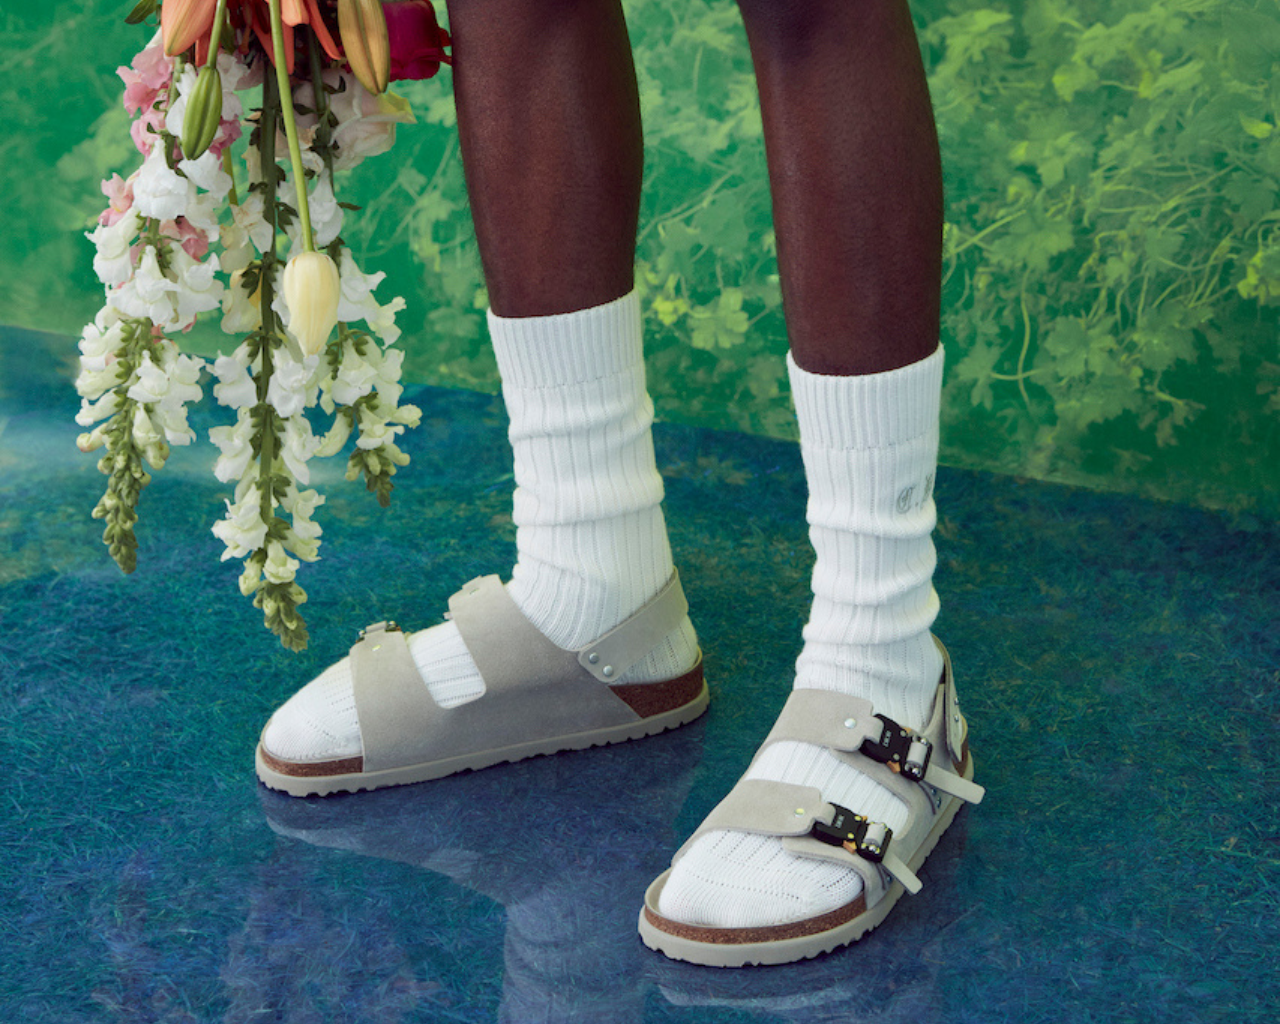 Dior Is Getting in on the Birkenstock Boom